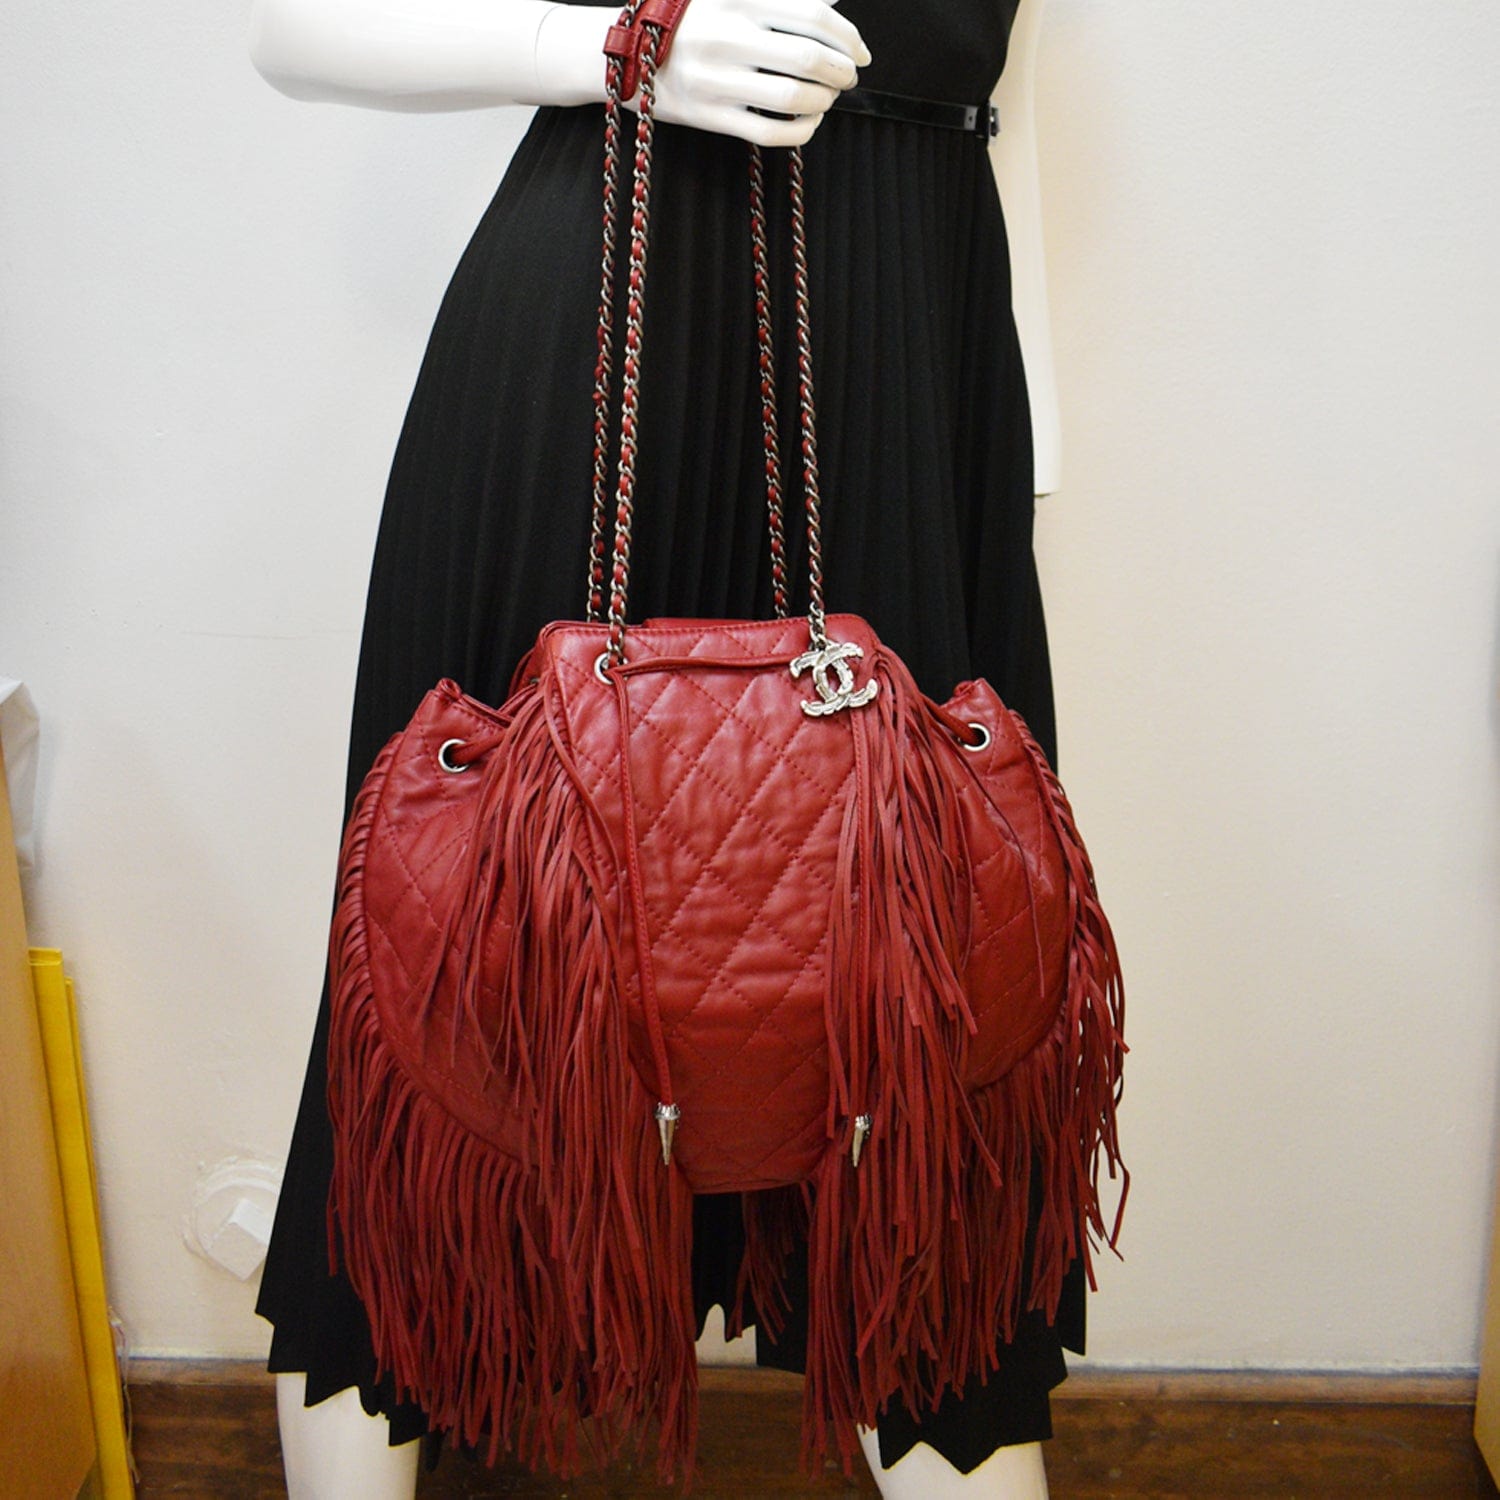 Leather HOBO Bag-Red | ceciliadebucourt